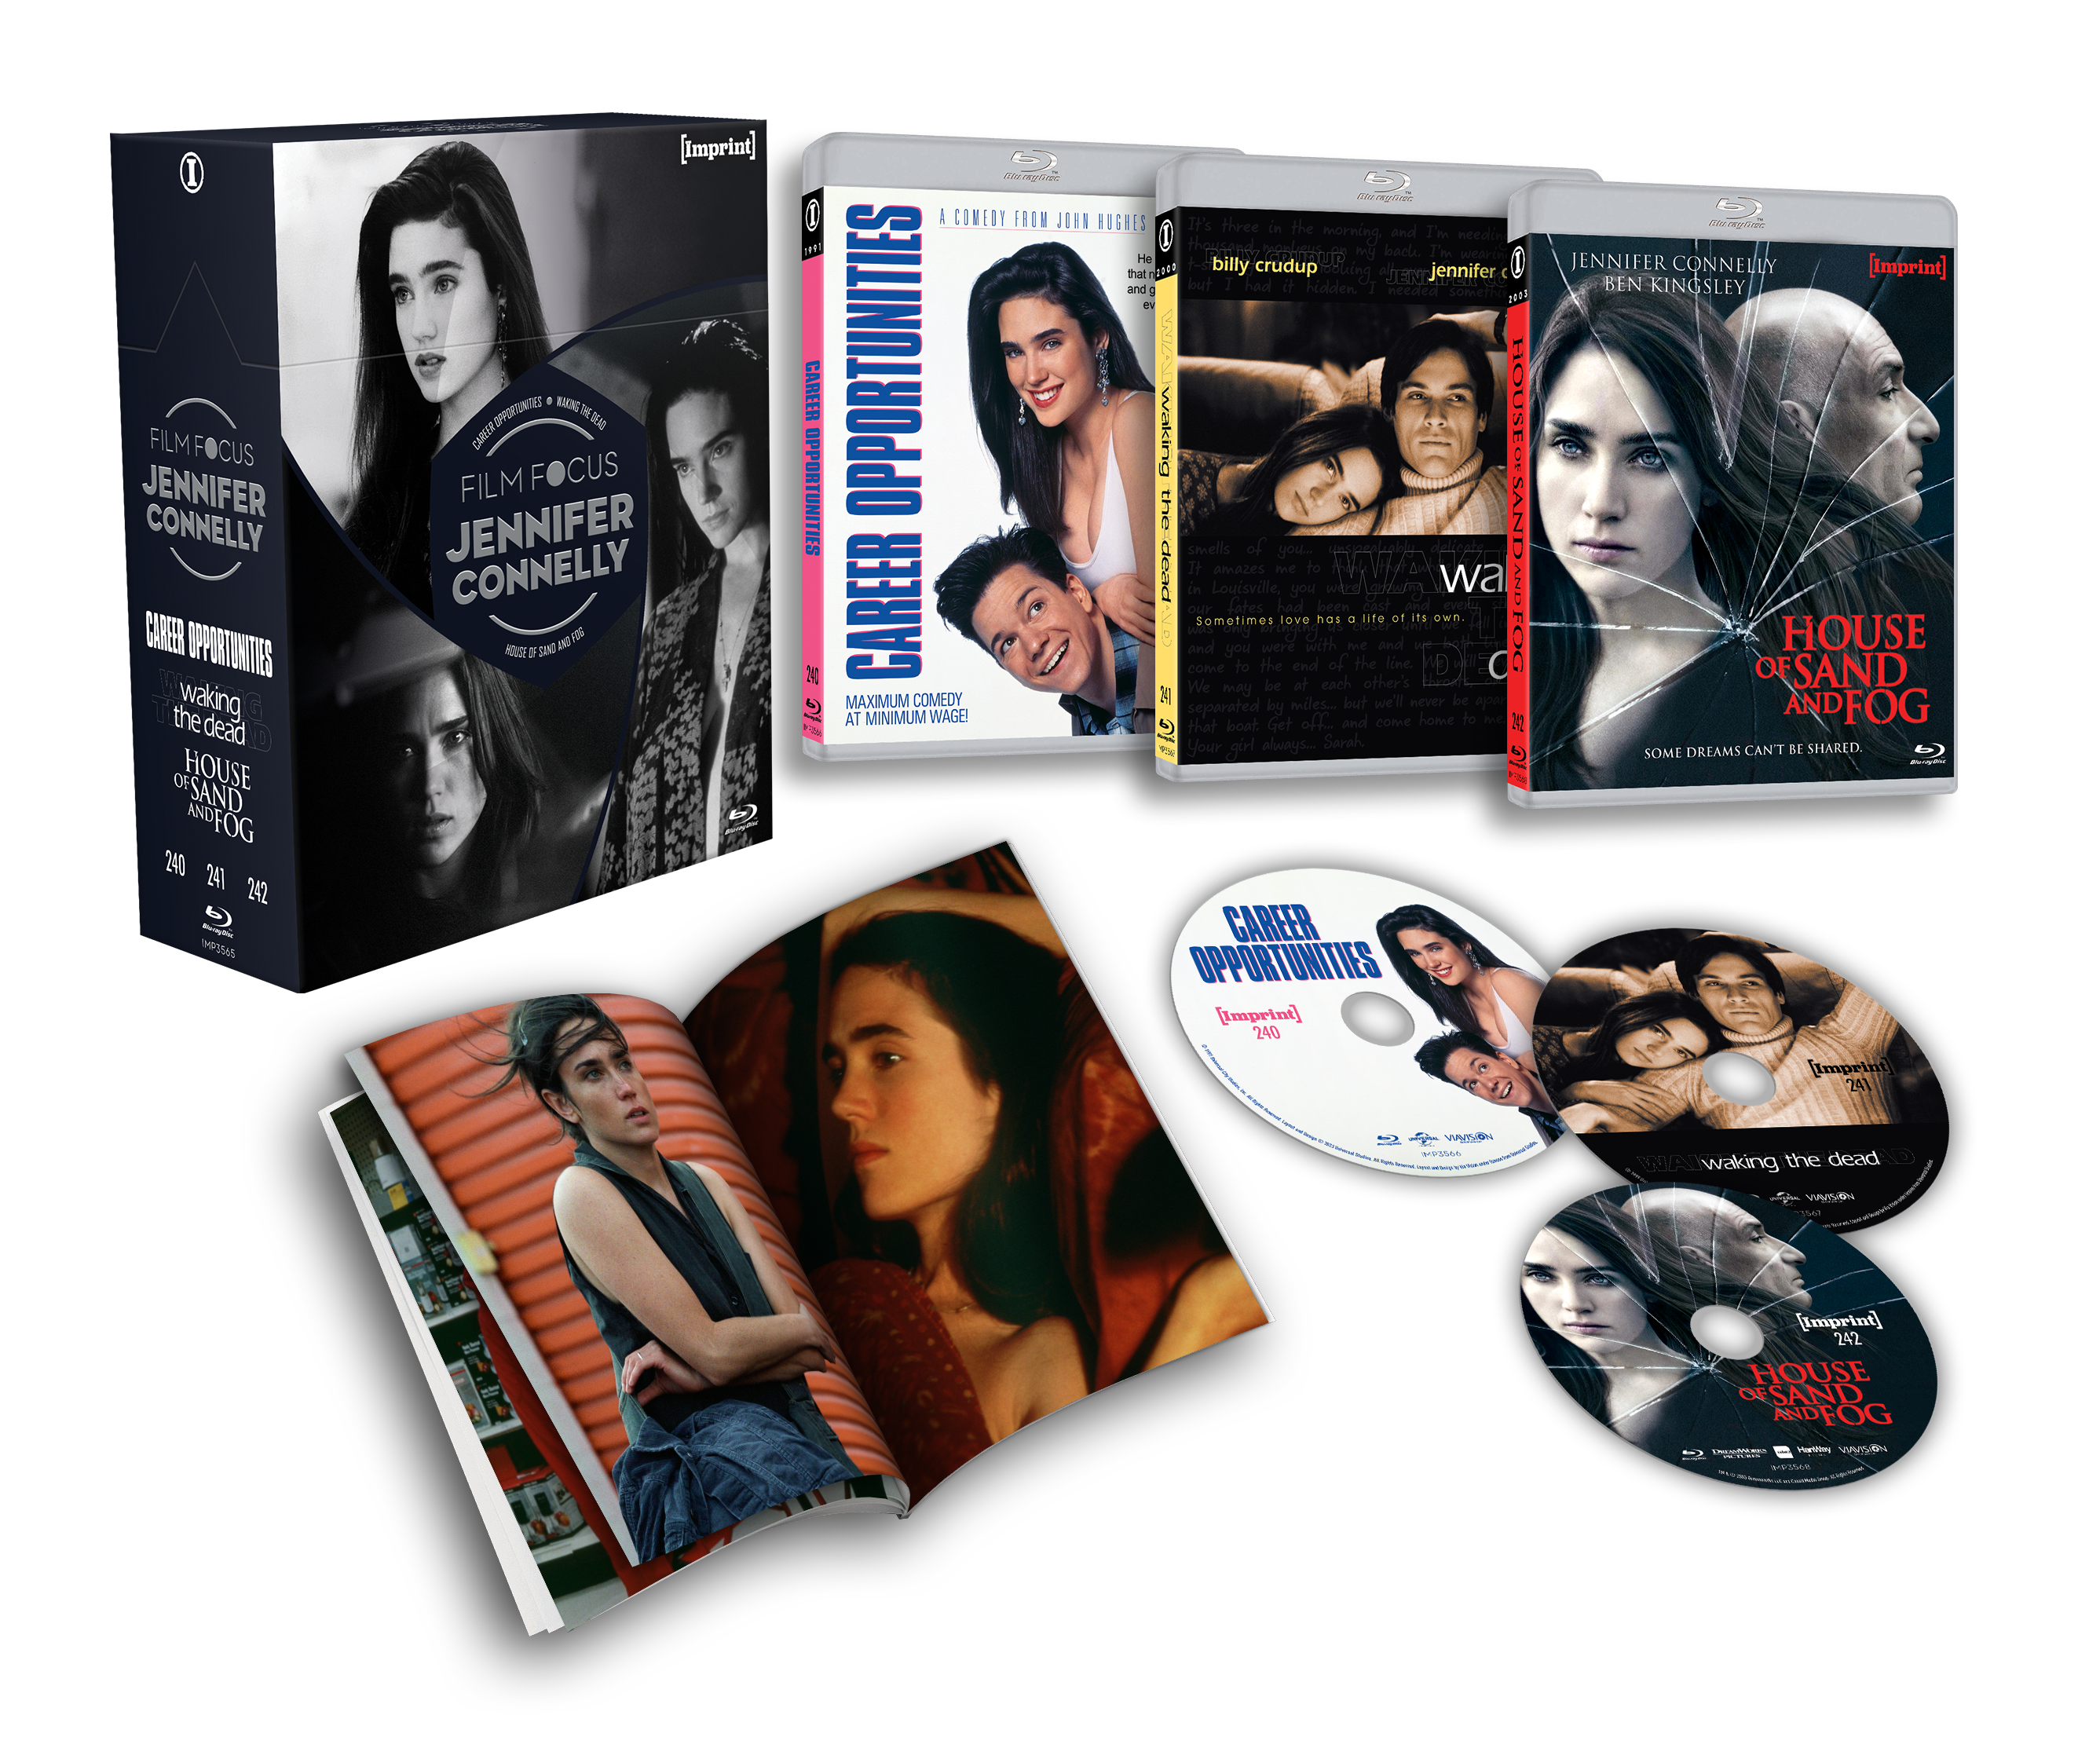 Career Opportunities  Jennifer connelly, Career opportunities movie,  Vintage music